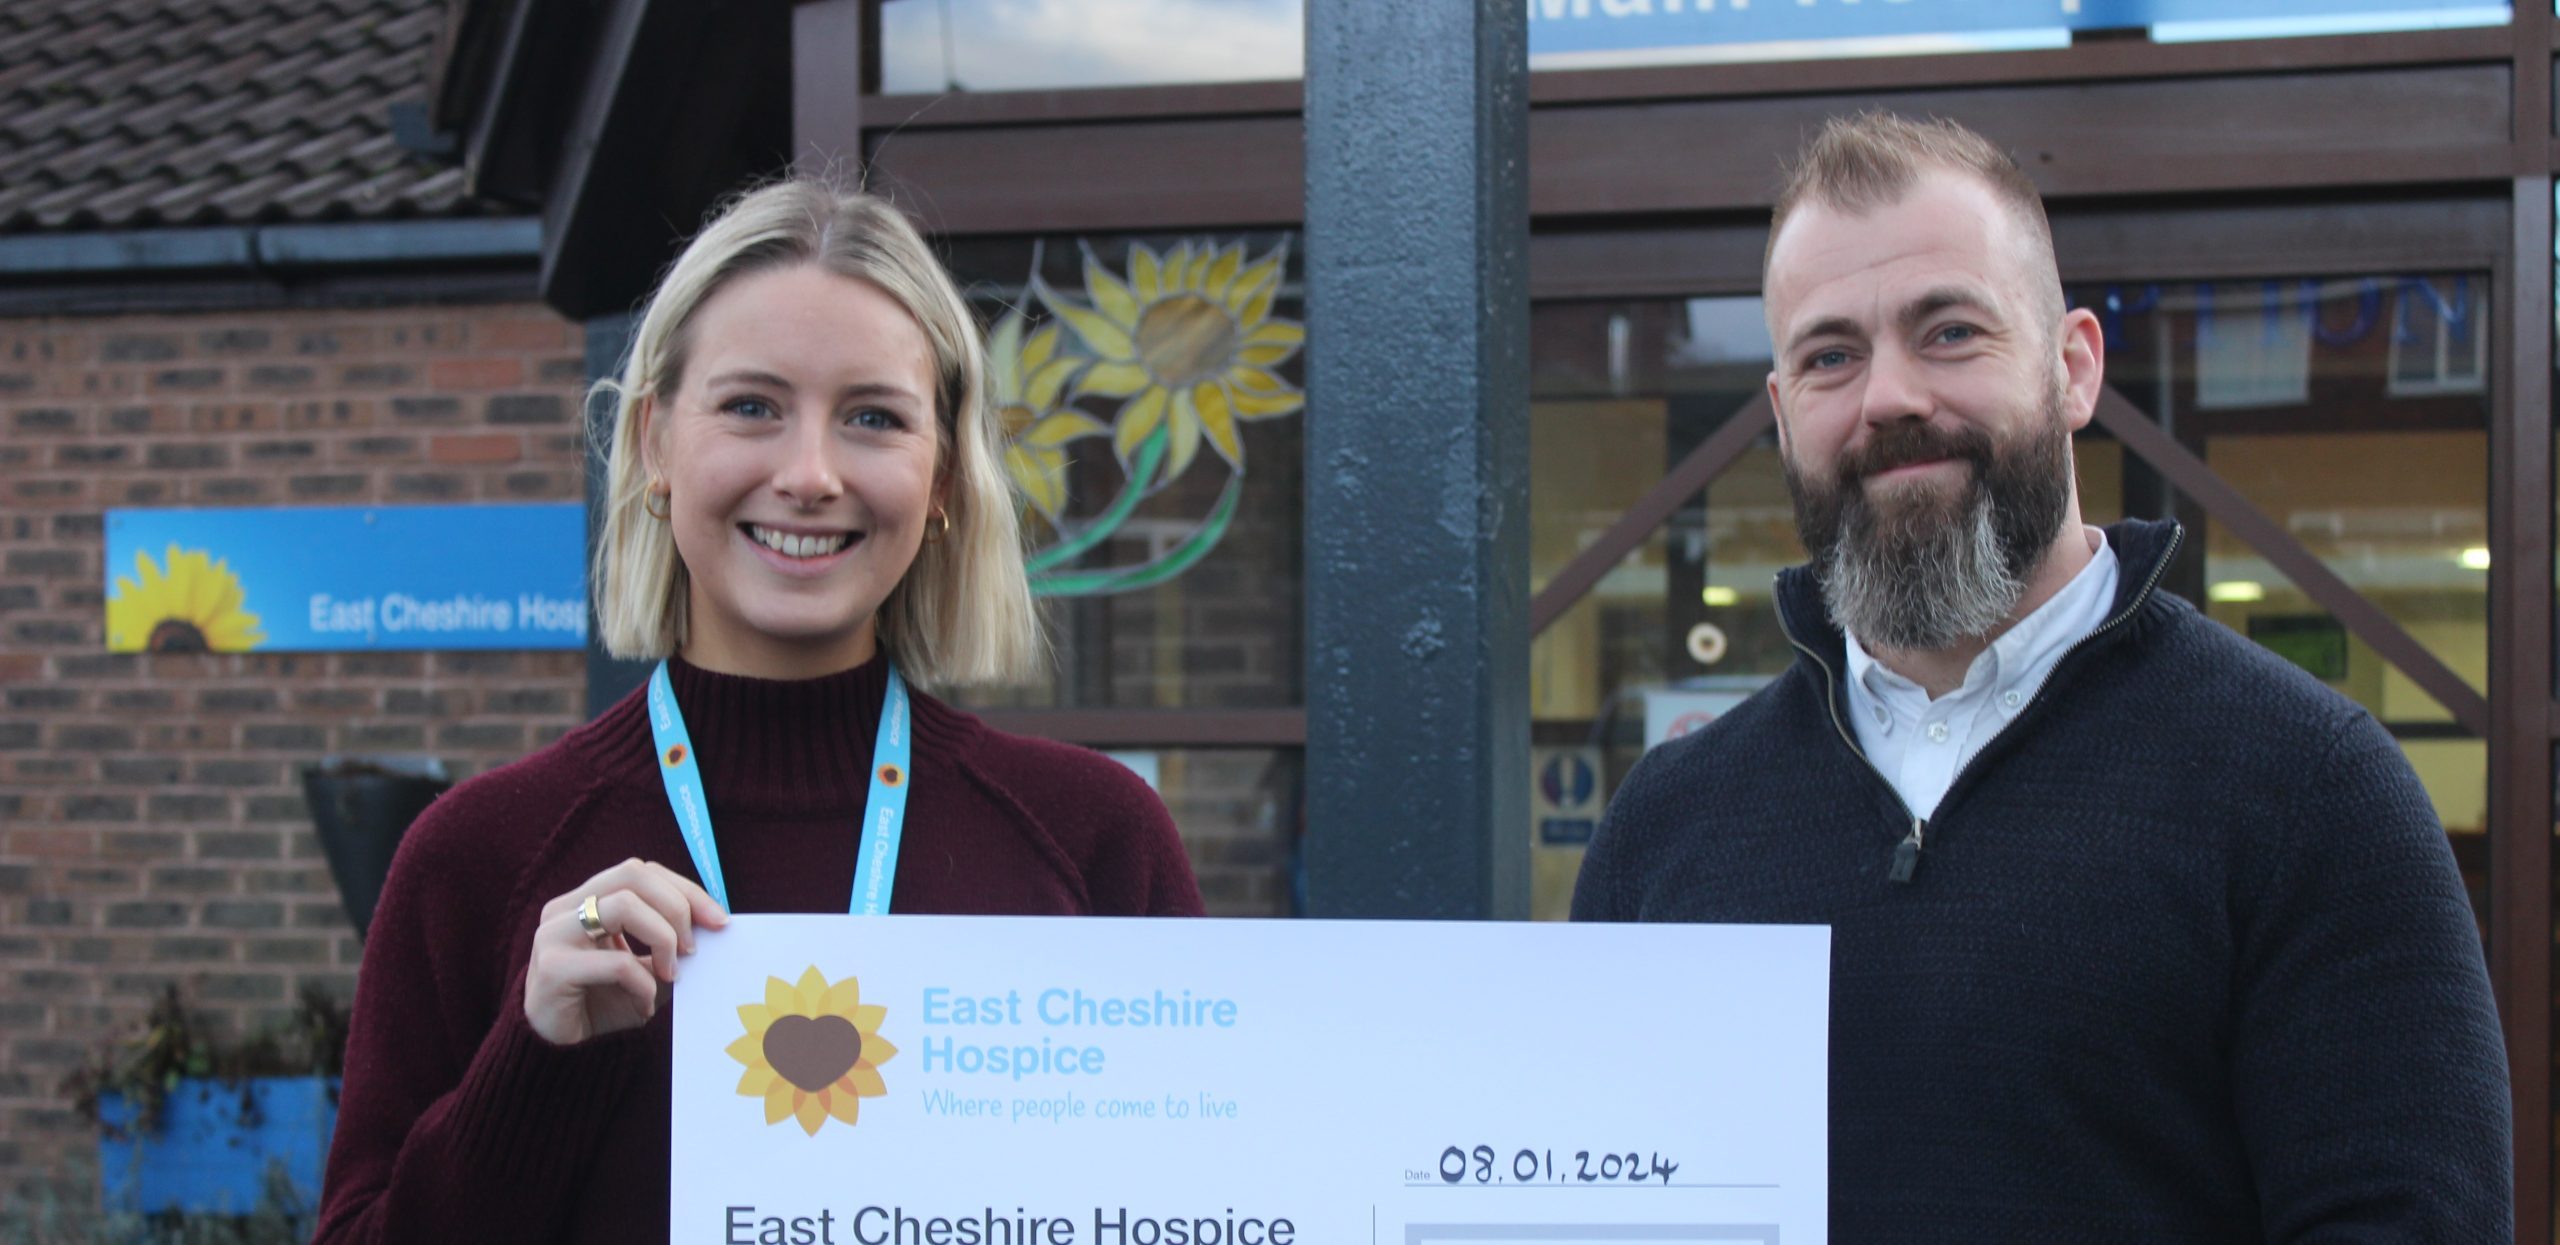 Will Month in October raised £11,373 for East Cheshire Hospice